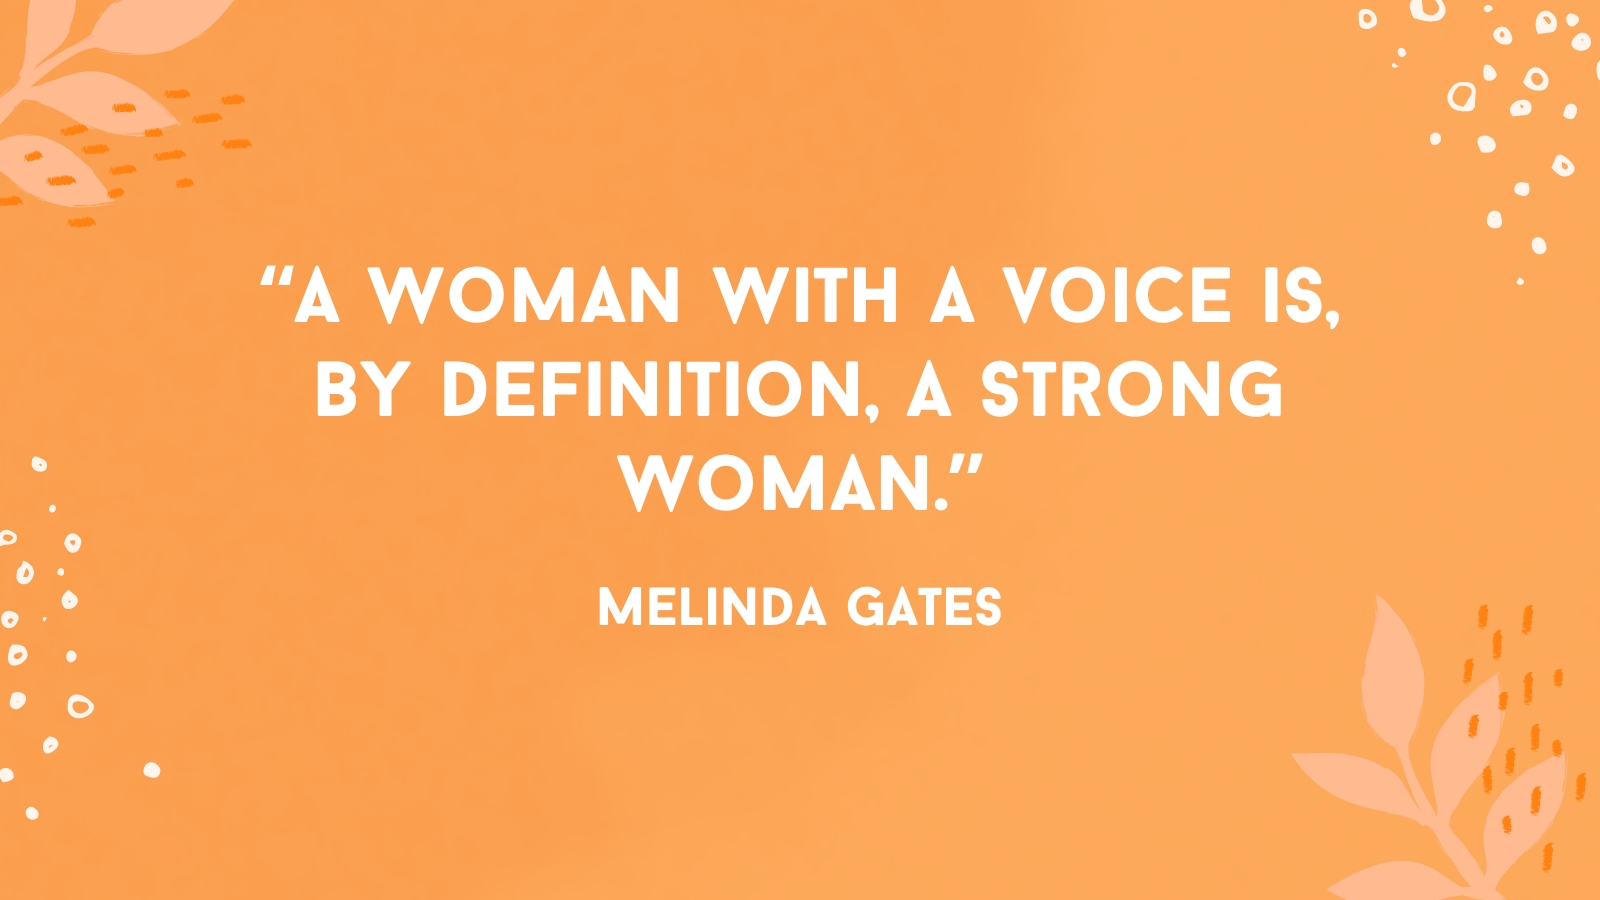 Famous Quotes by Women